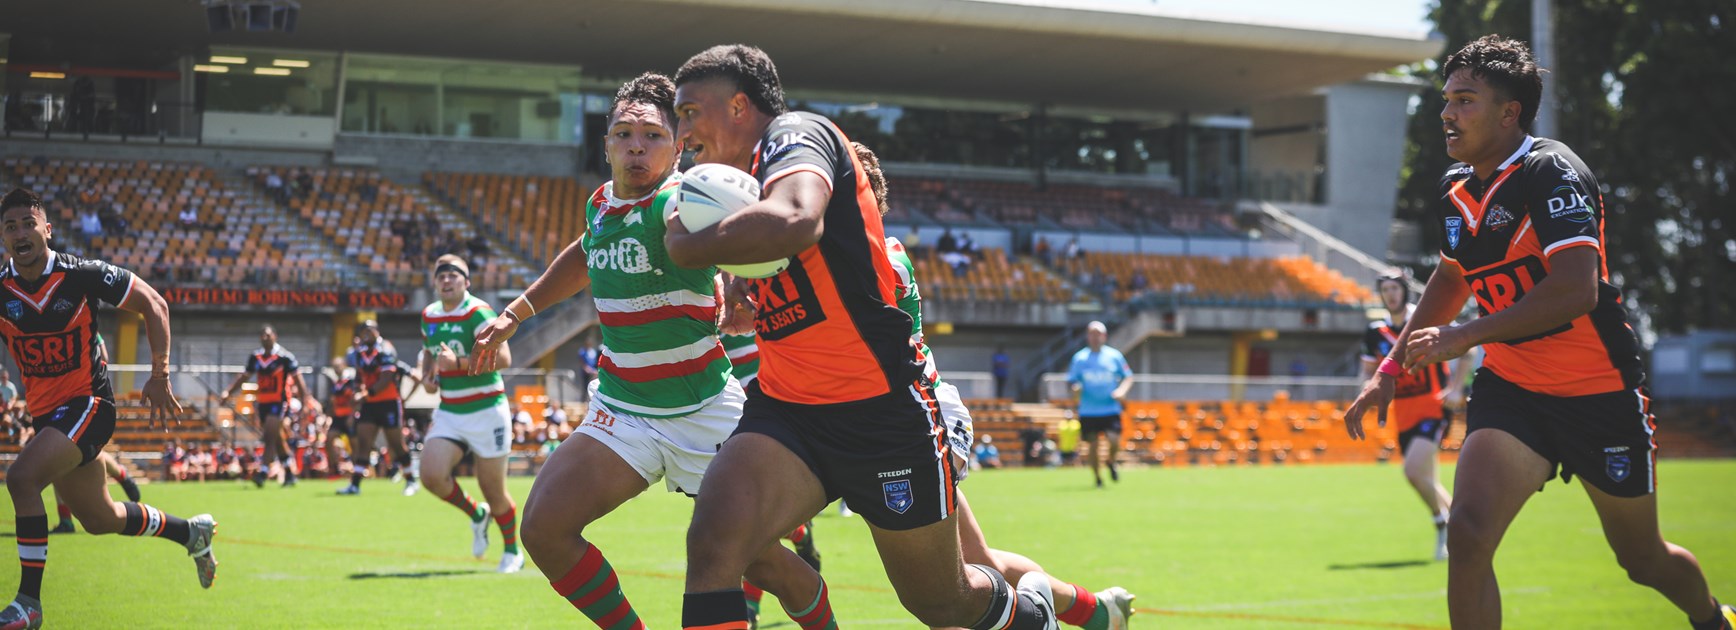 Wests Tigers Jersey Flegg draw released